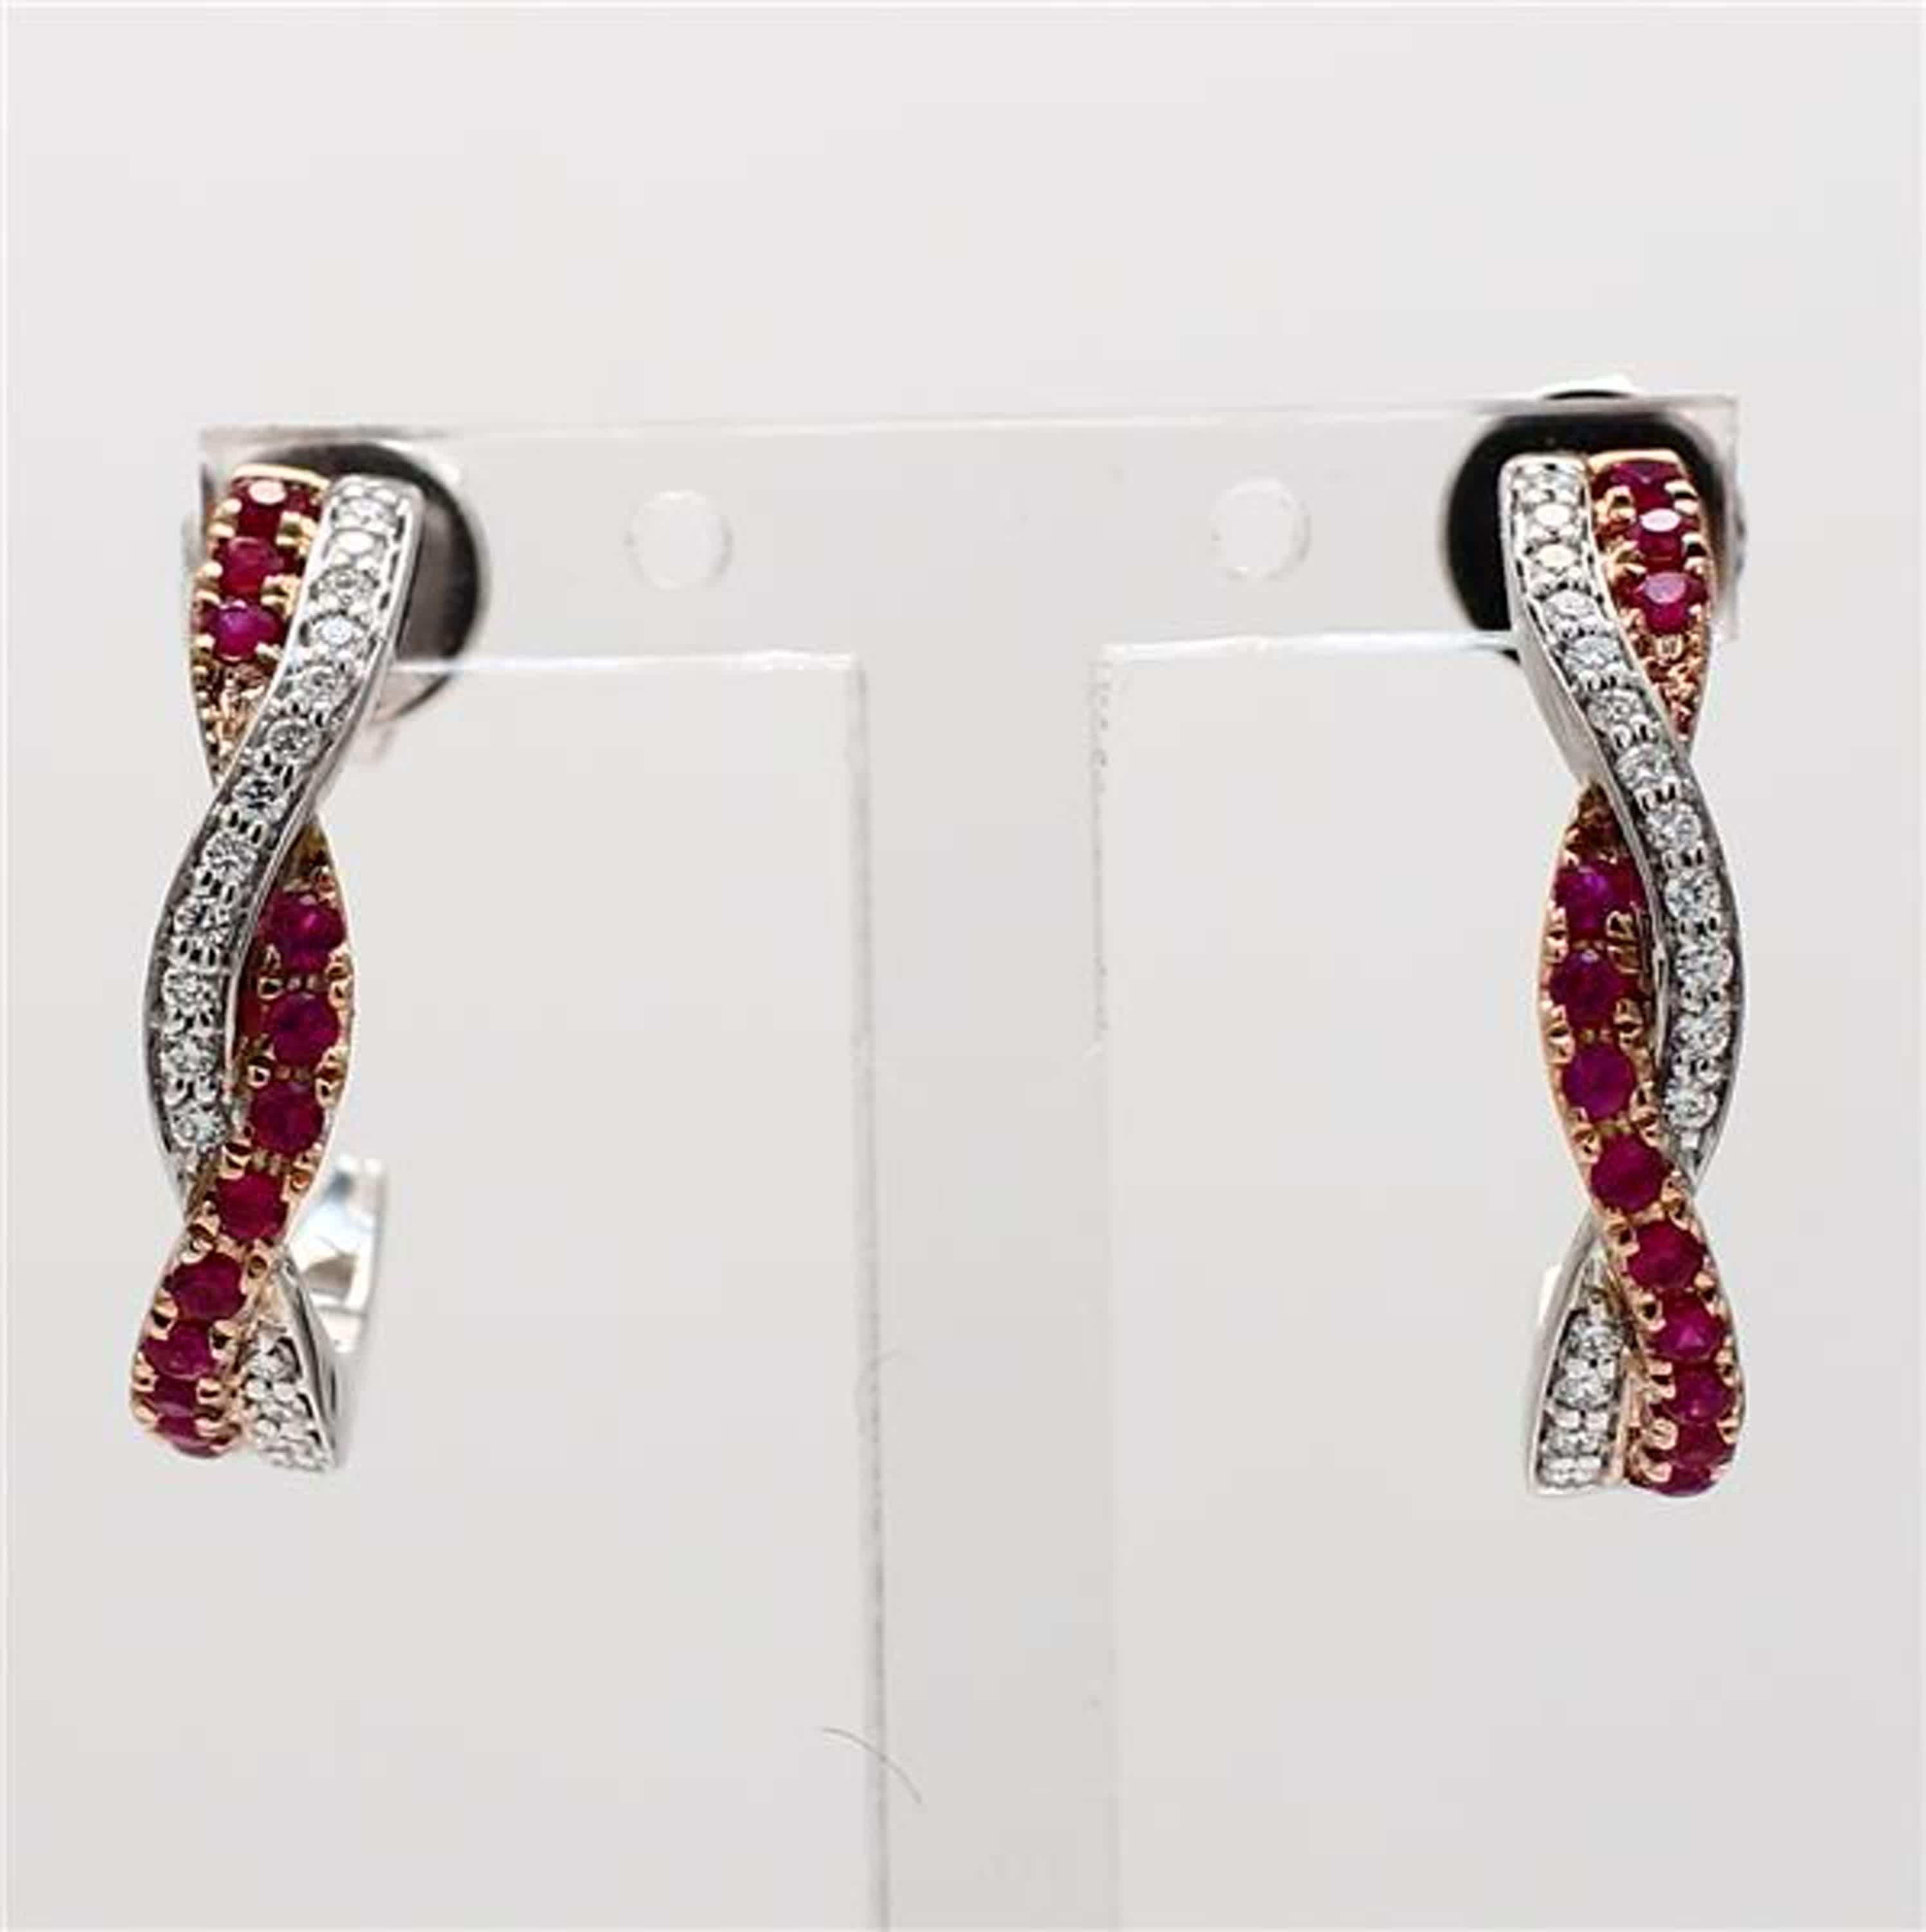 RareGemWorld's classic ruby earrings. Mounted in a beautiful 18K Rose and White Gold setting with natural round cut red ruby's. These earrings include both natural round red ruby's and natural round white diamond melee in a beautiful interlocking